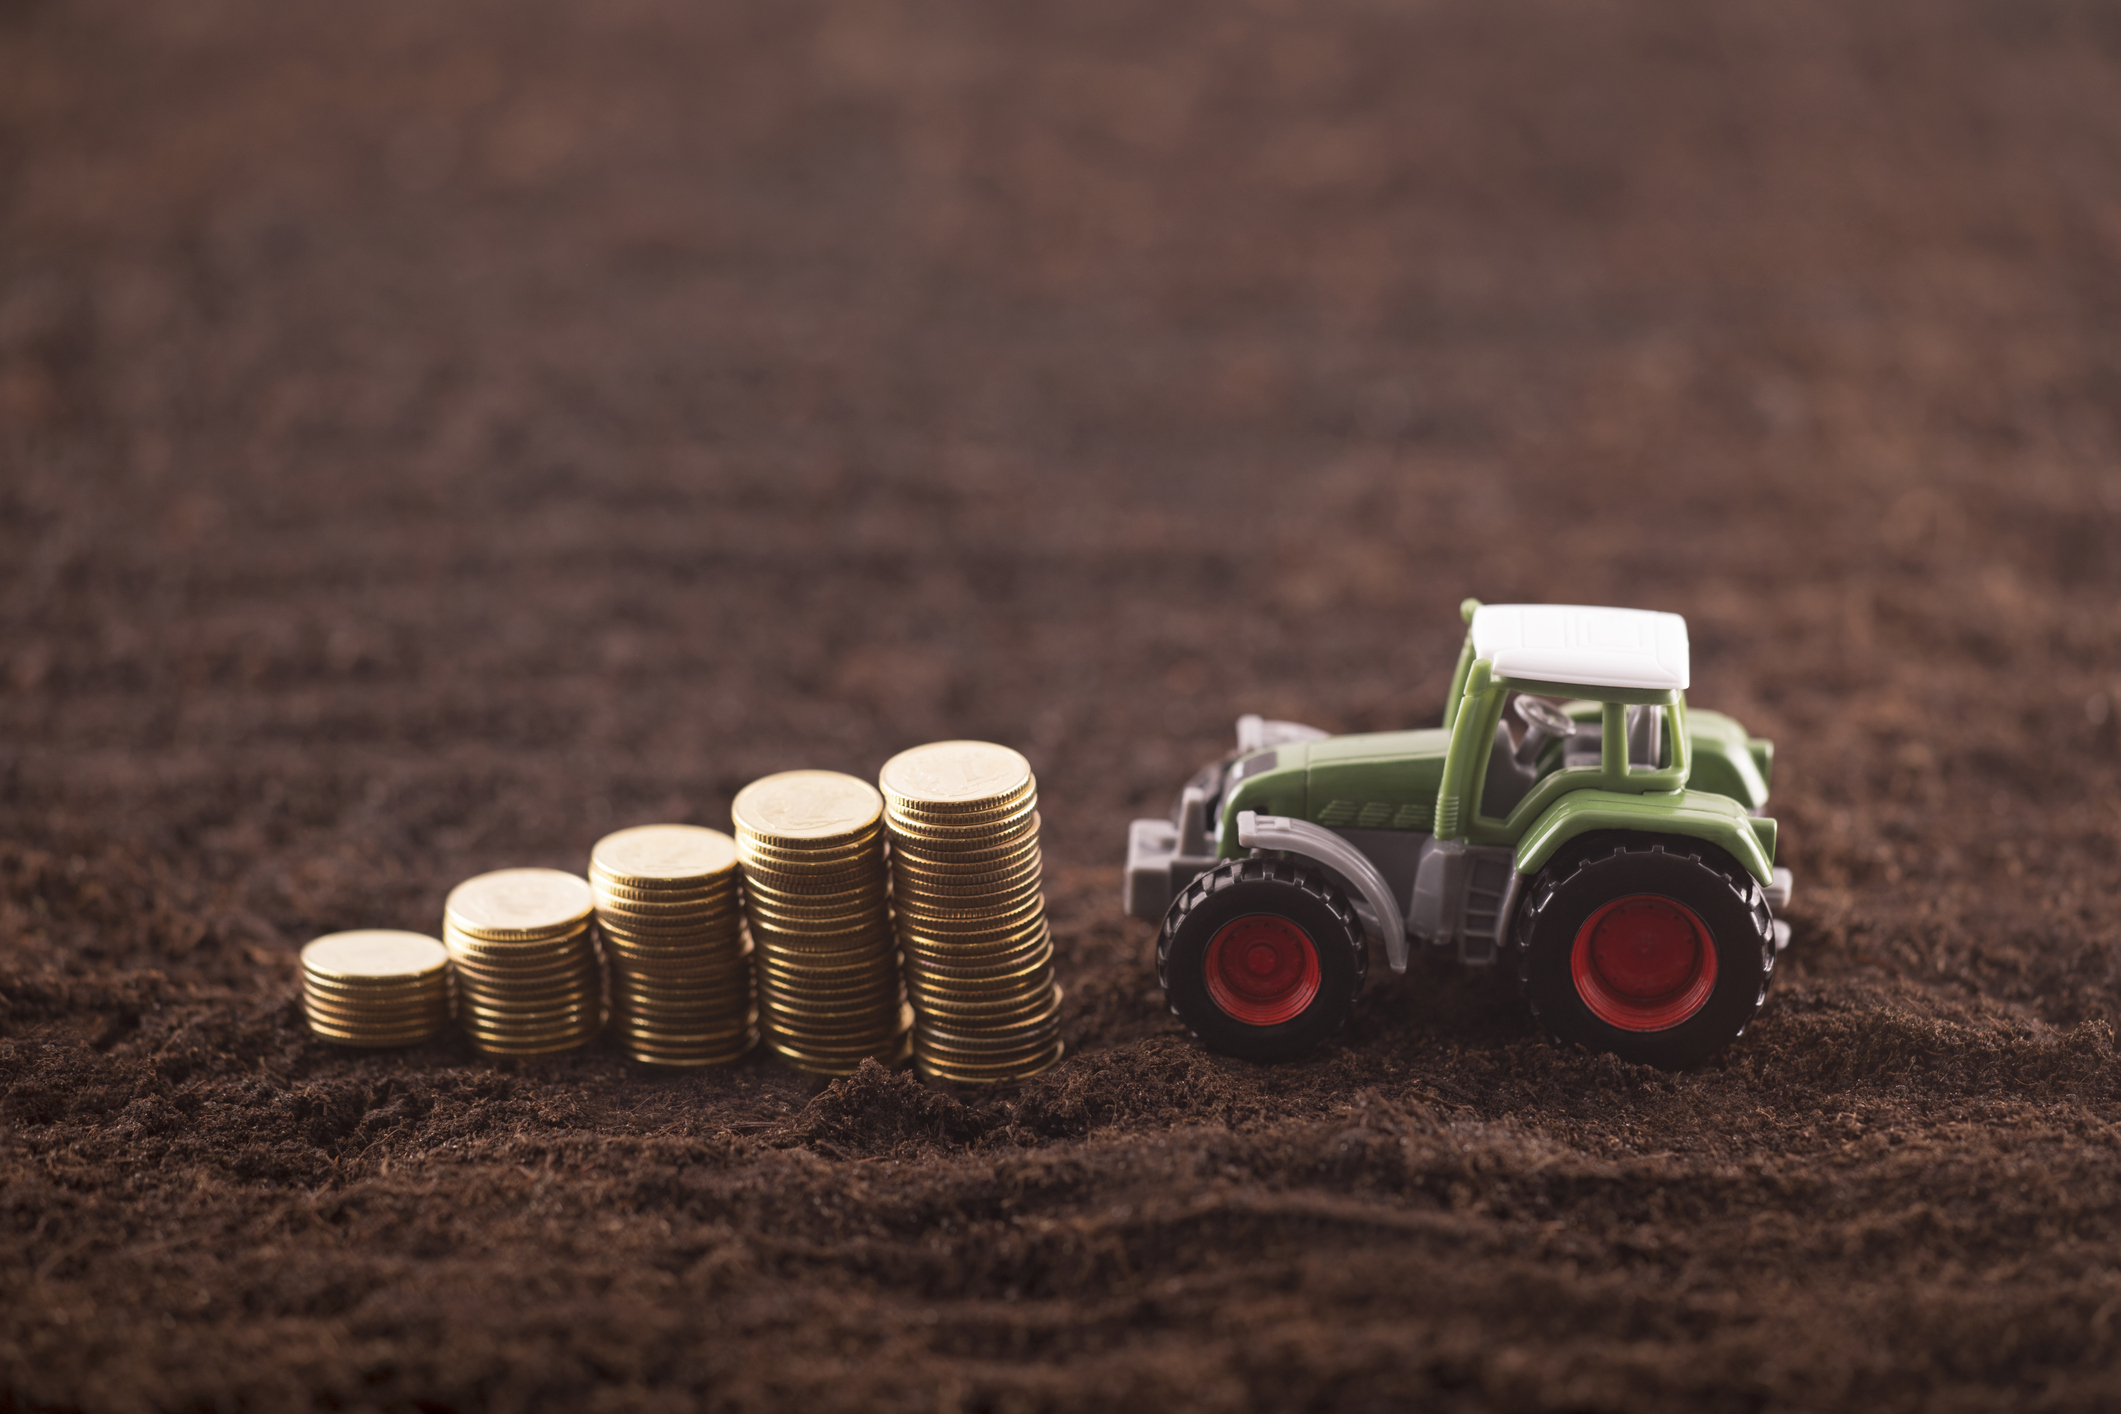 Green toy tractor carrying coins on a soil field